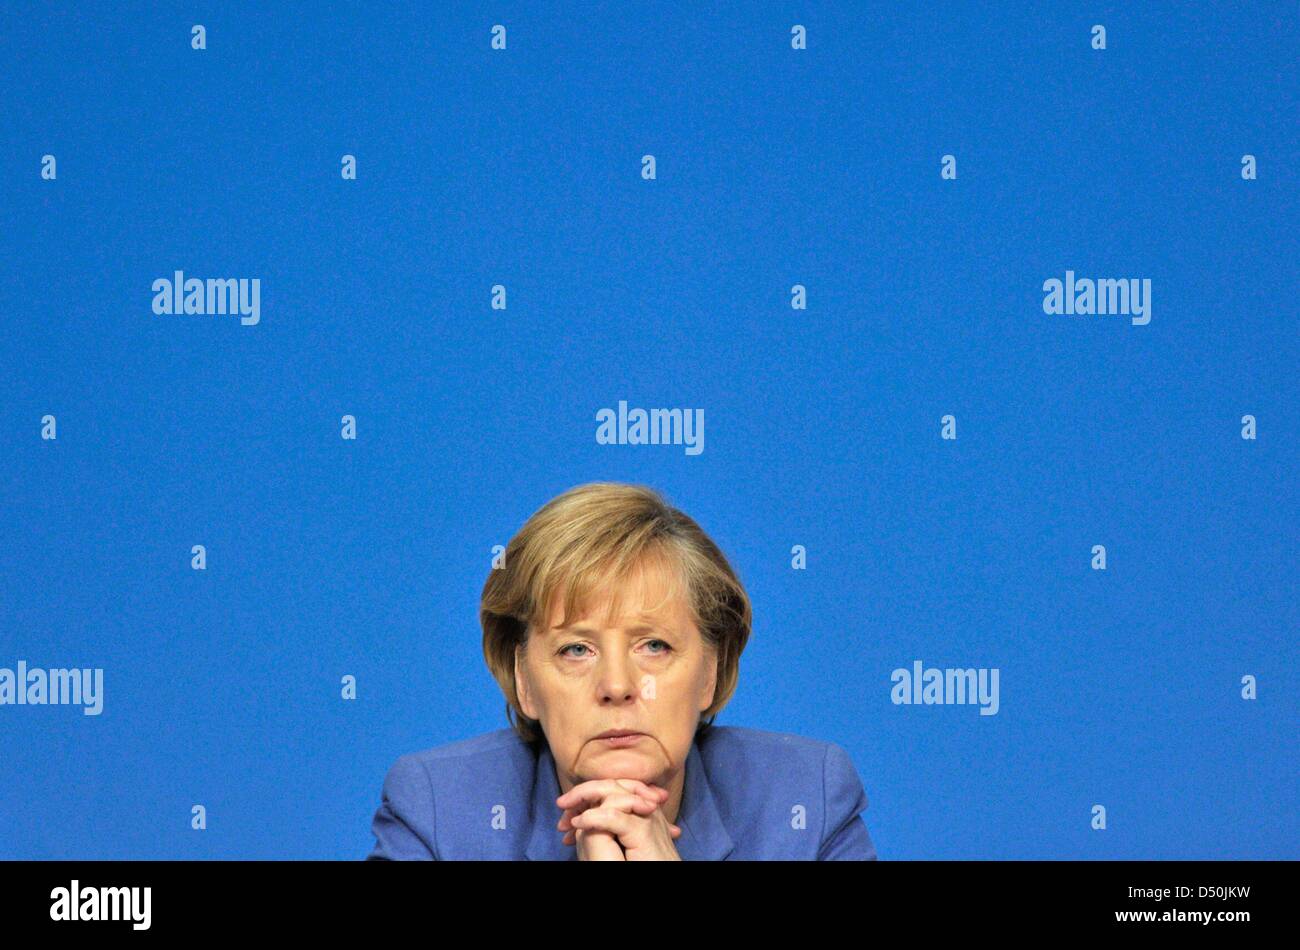 German Chancellor Angela Merkel in Karlsruhe, Germany, 16 November 2010. WikiLeaks released hundreds of thousands of secret US documents on 28 November 2010 exposing years of diplomatic communications that reveal the inner workings of sensitive relations with worldwide governments and provide candid assessments of foreign leaders. The score on Chancellor  Merkel said 'Avoids risk,  Stock Photo